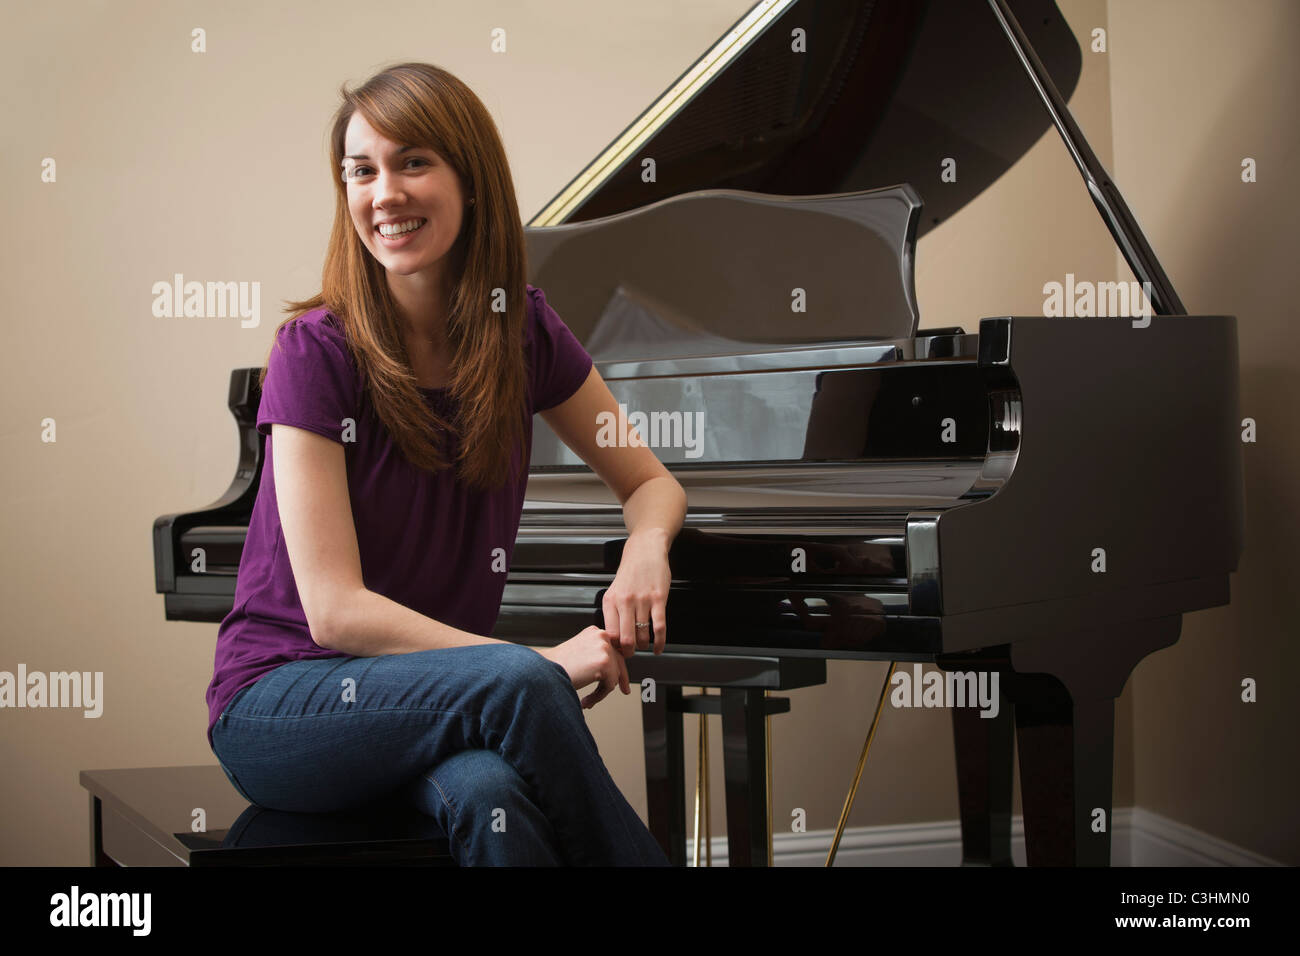 Young woman sitting by grand piano, smiling Stock Photo